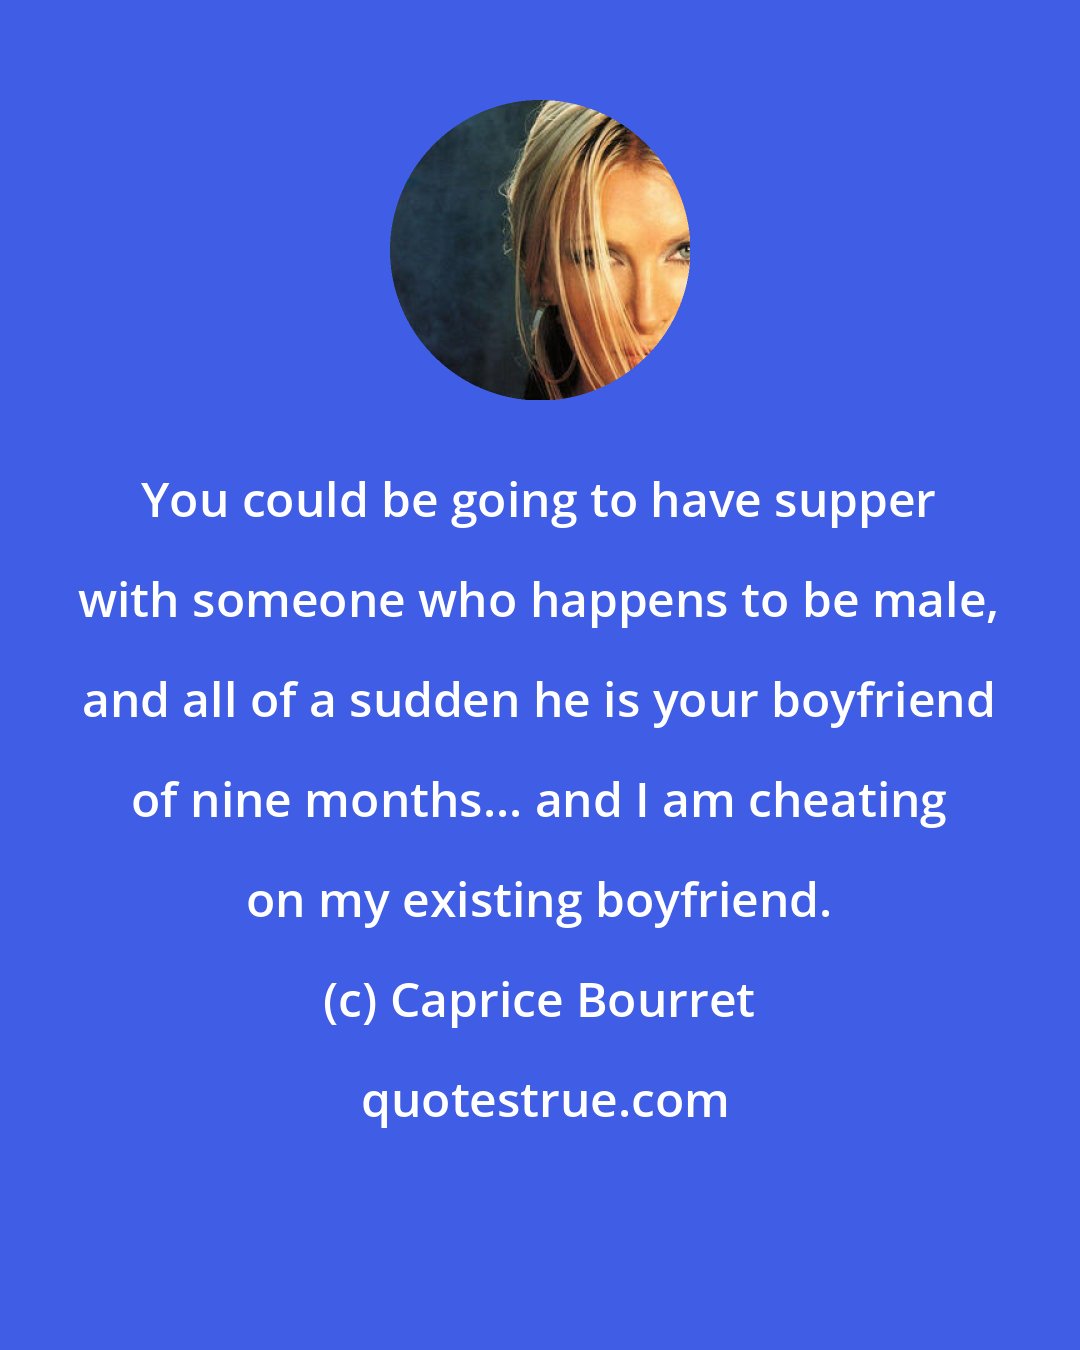 Caprice Bourret: You could be going to have supper with someone who happens to be male, and all of a sudden he is your boyfriend of nine months... and I am cheating on my existing boyfriend.